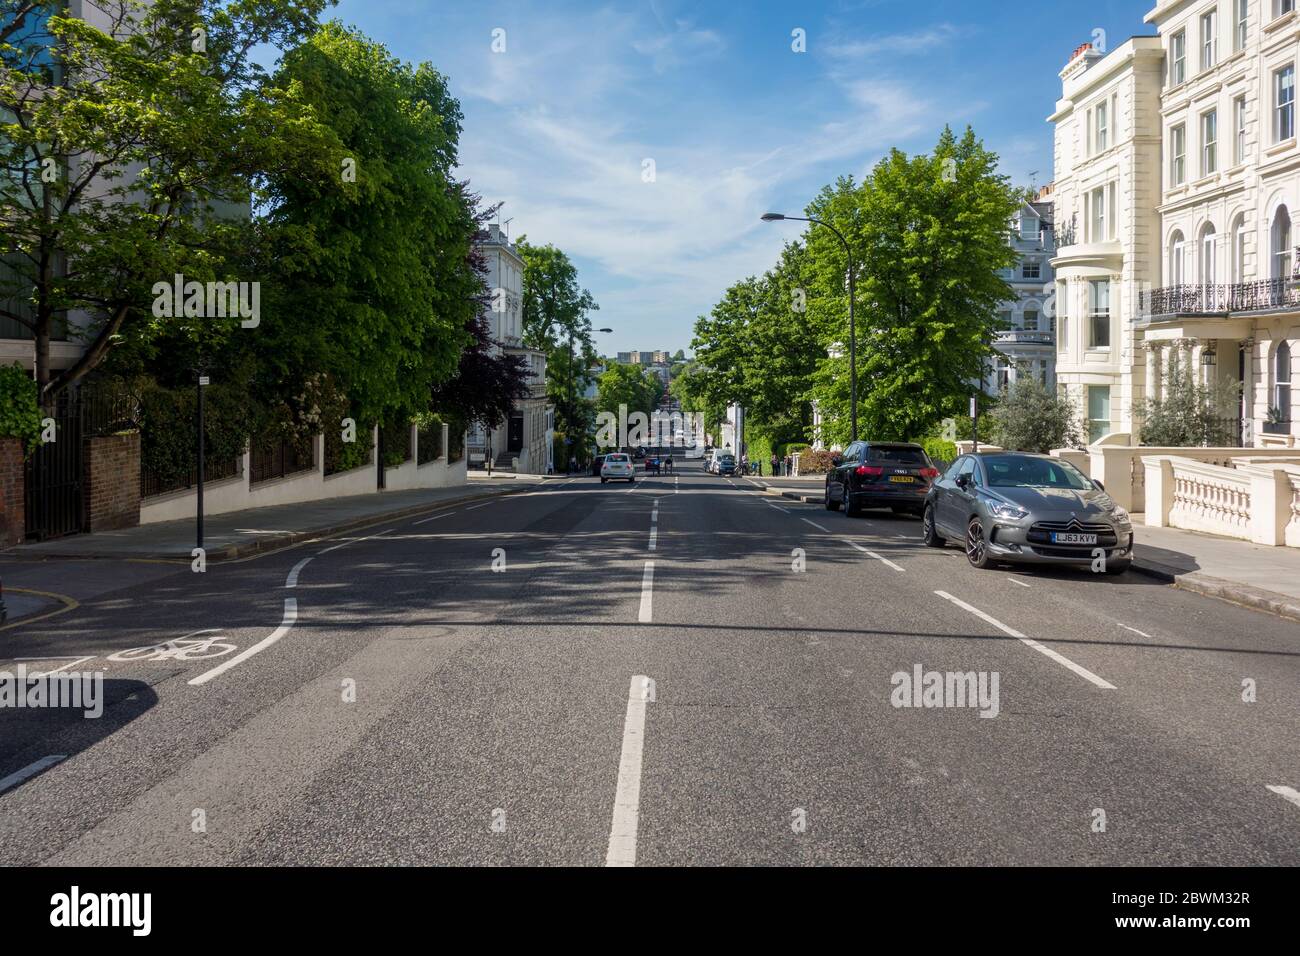 Ladbroke Grove Notting Hill, Londres, Royaume-Uni Banque D'Images